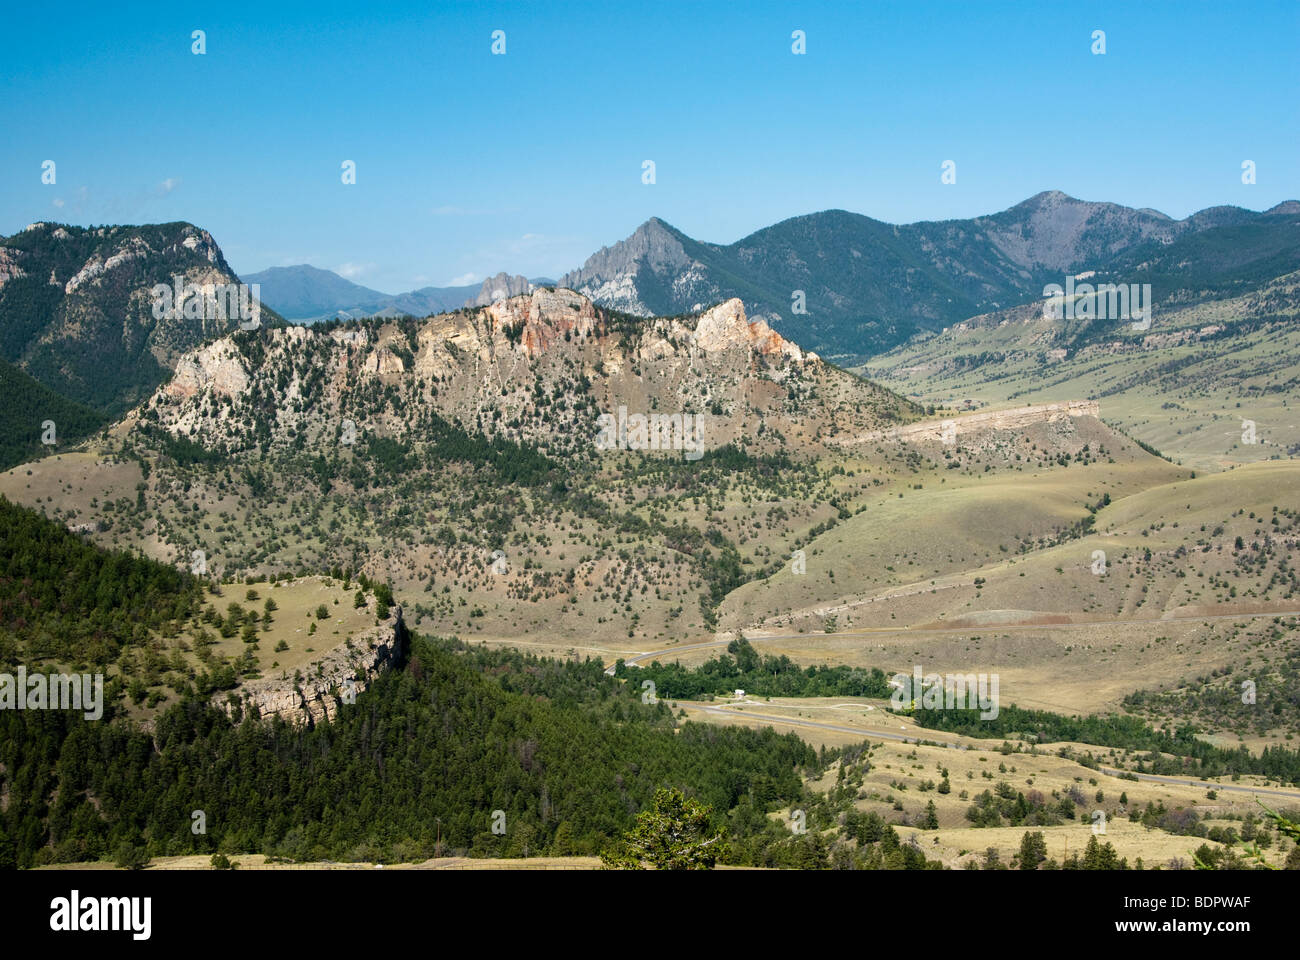 View of the mountains and valleys along Chief Joseph Scenic Byway in Wyoming. Stock Photo